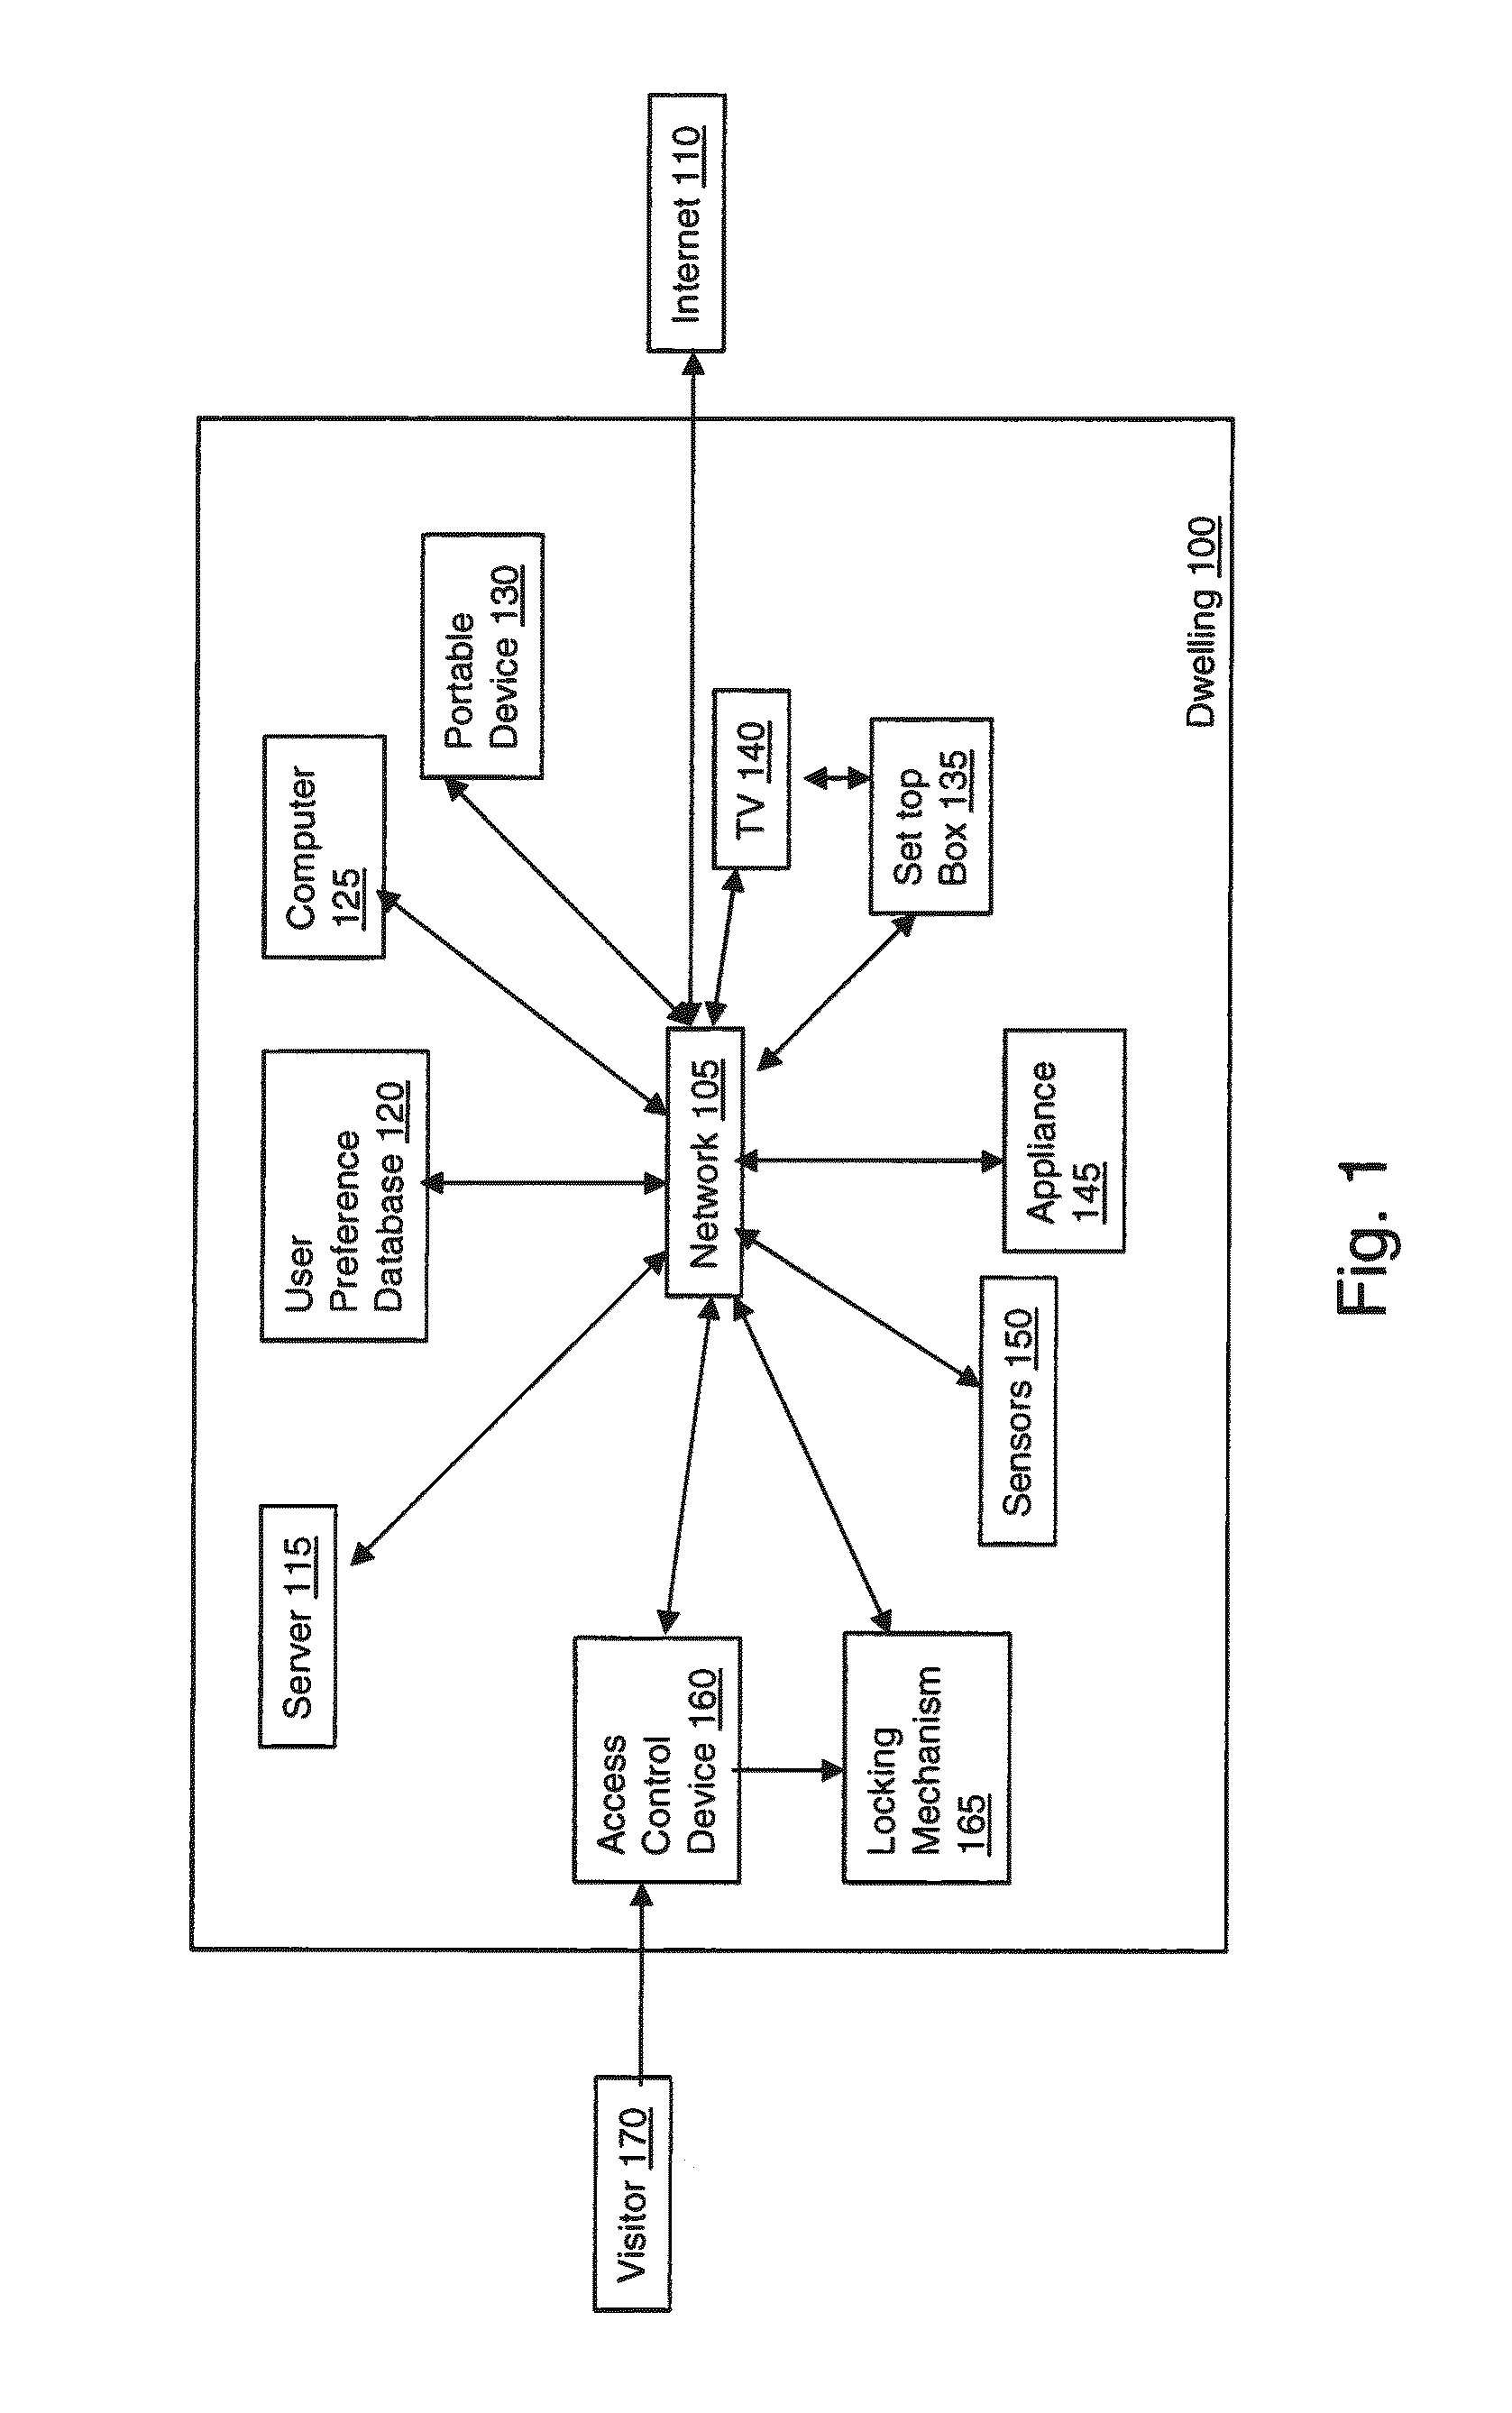 Method and apparatus for controlling access to a home using visual cues